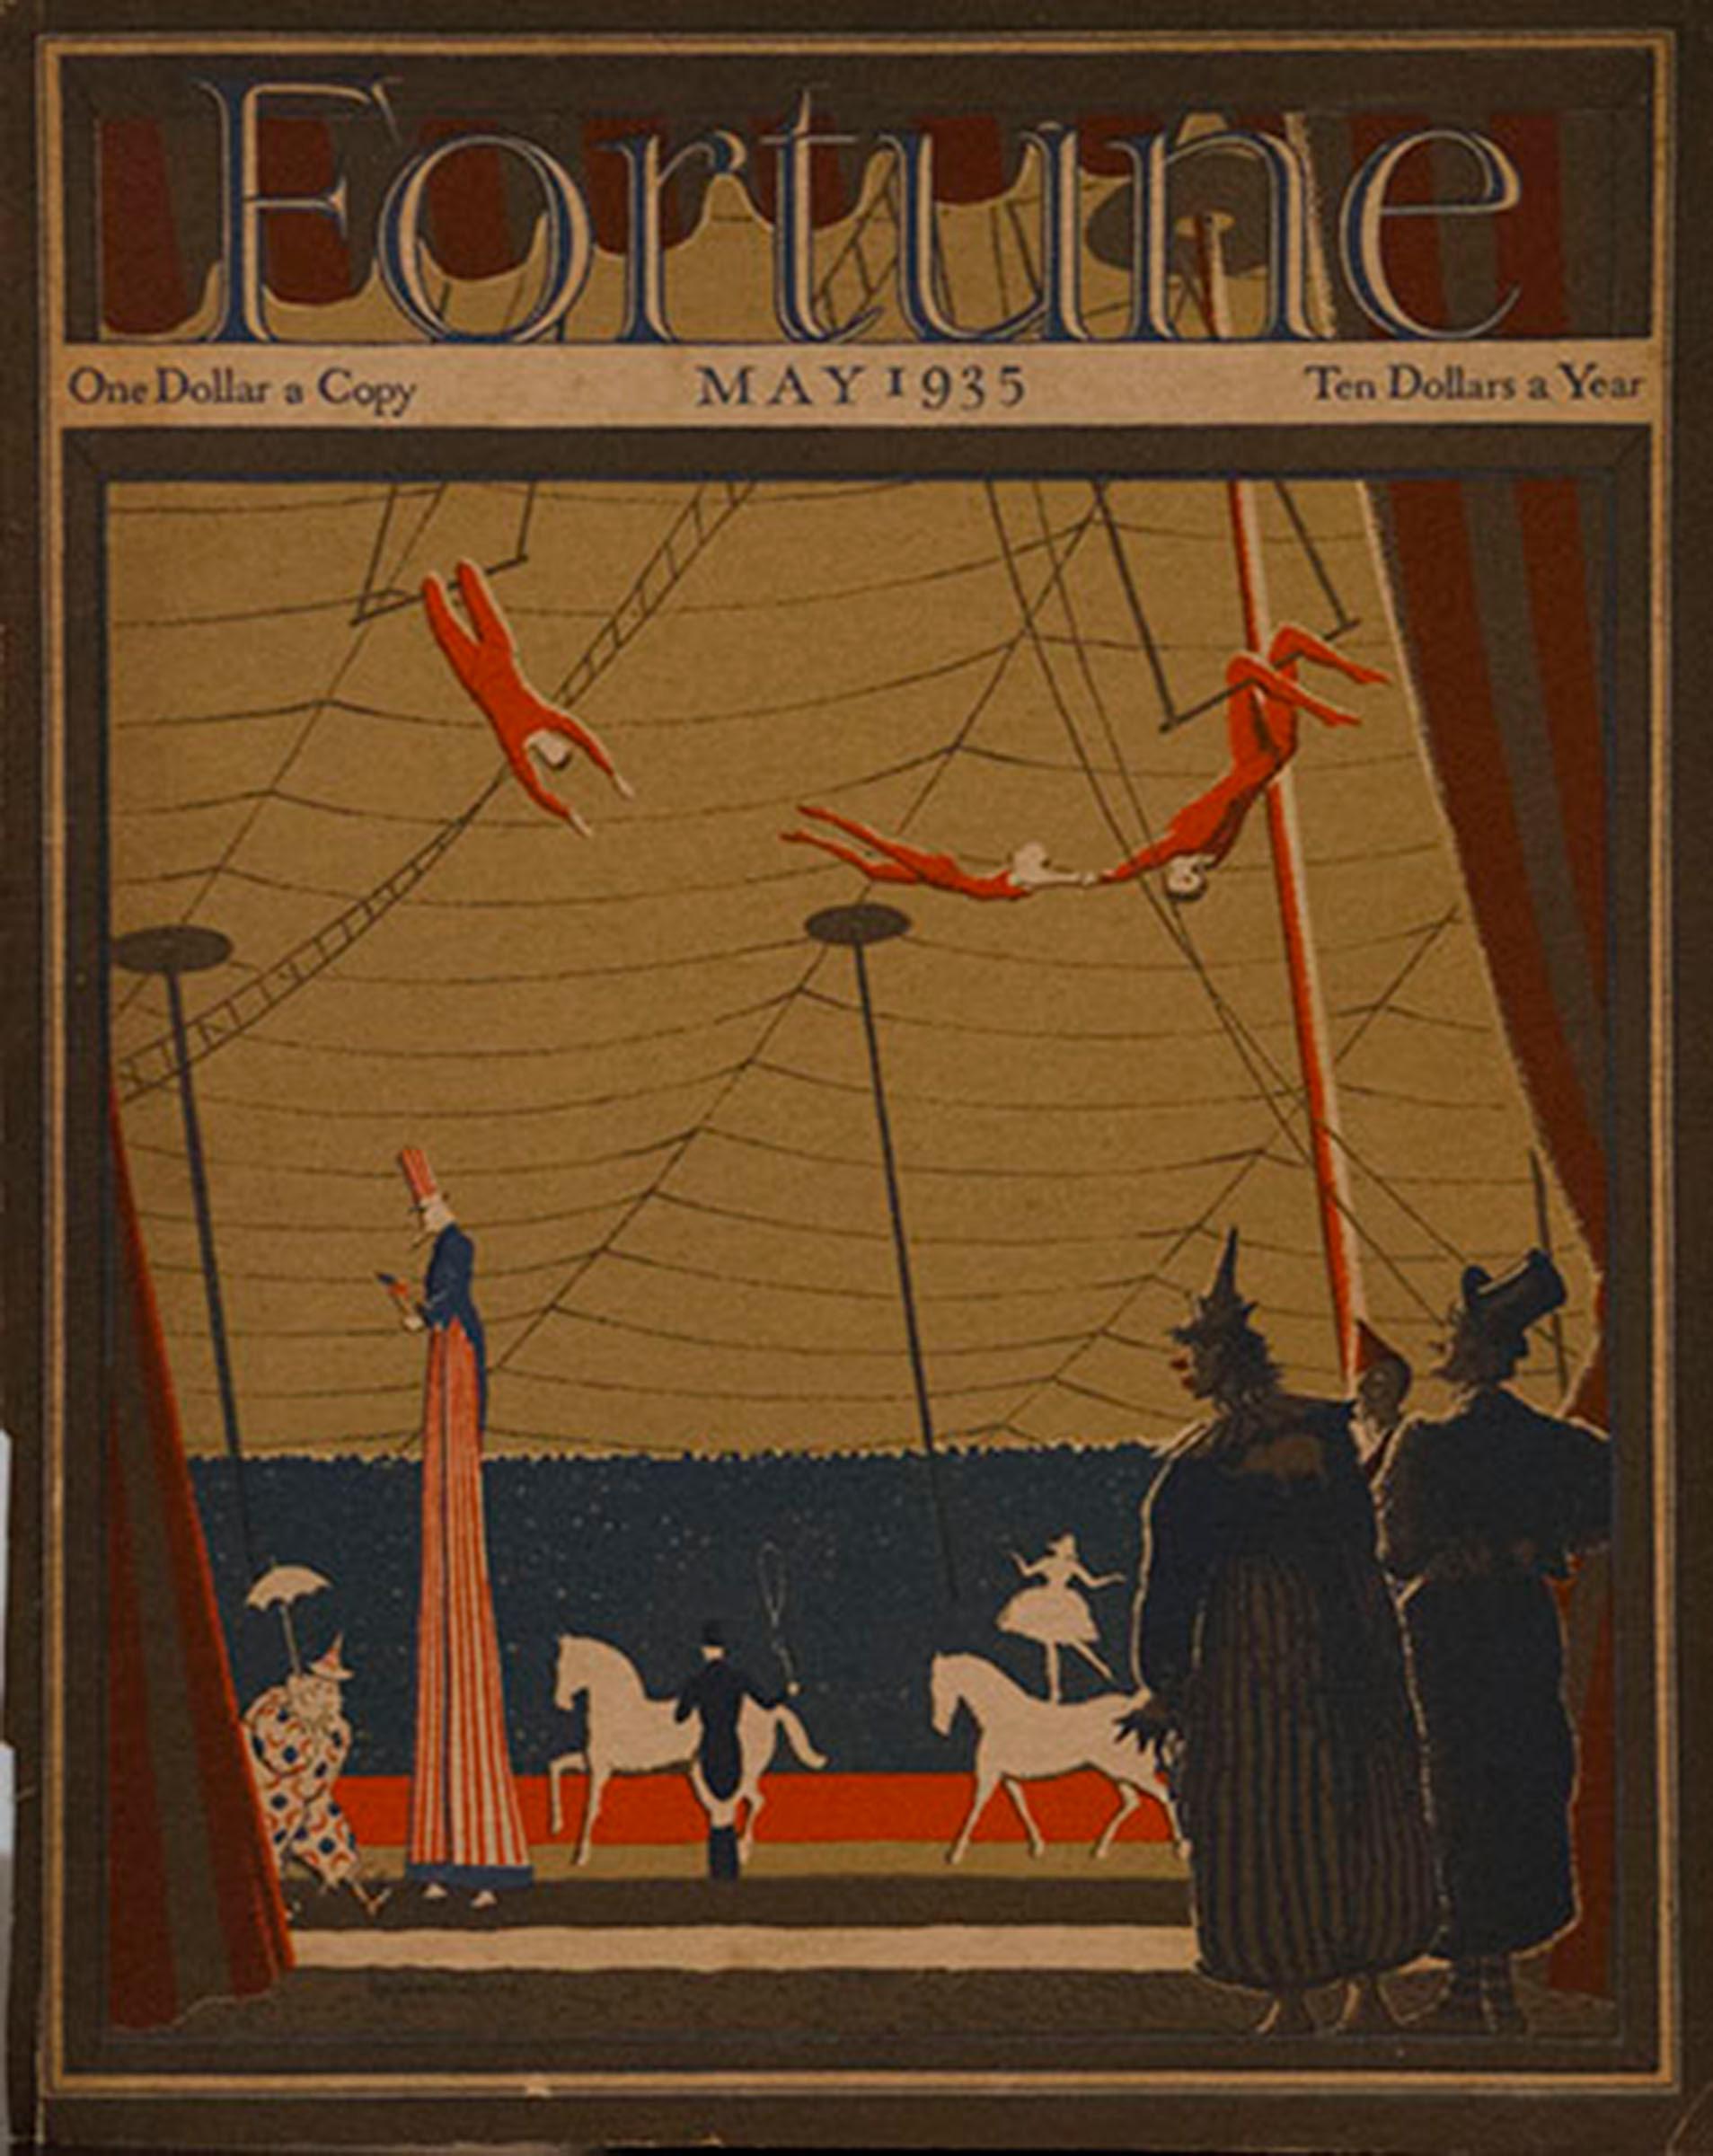 A Collection of 65 Original Fortune Magazine Covers 1931-1940 1